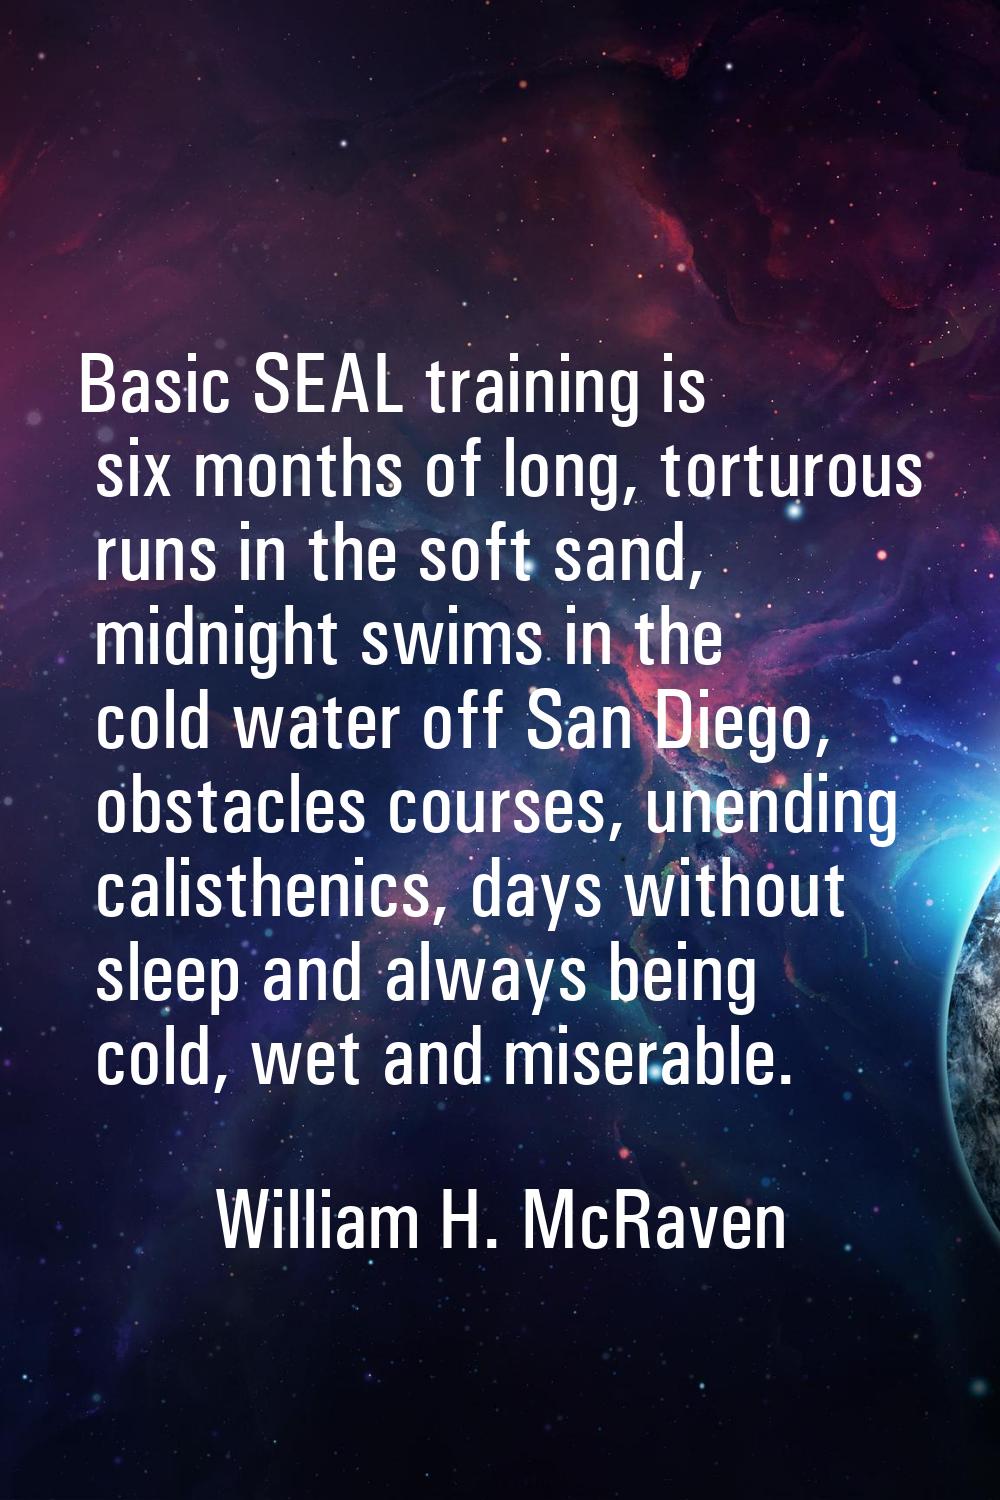 Basic SEAL training is six months of long, torturous runs in the soft sand, midnight swims in the c